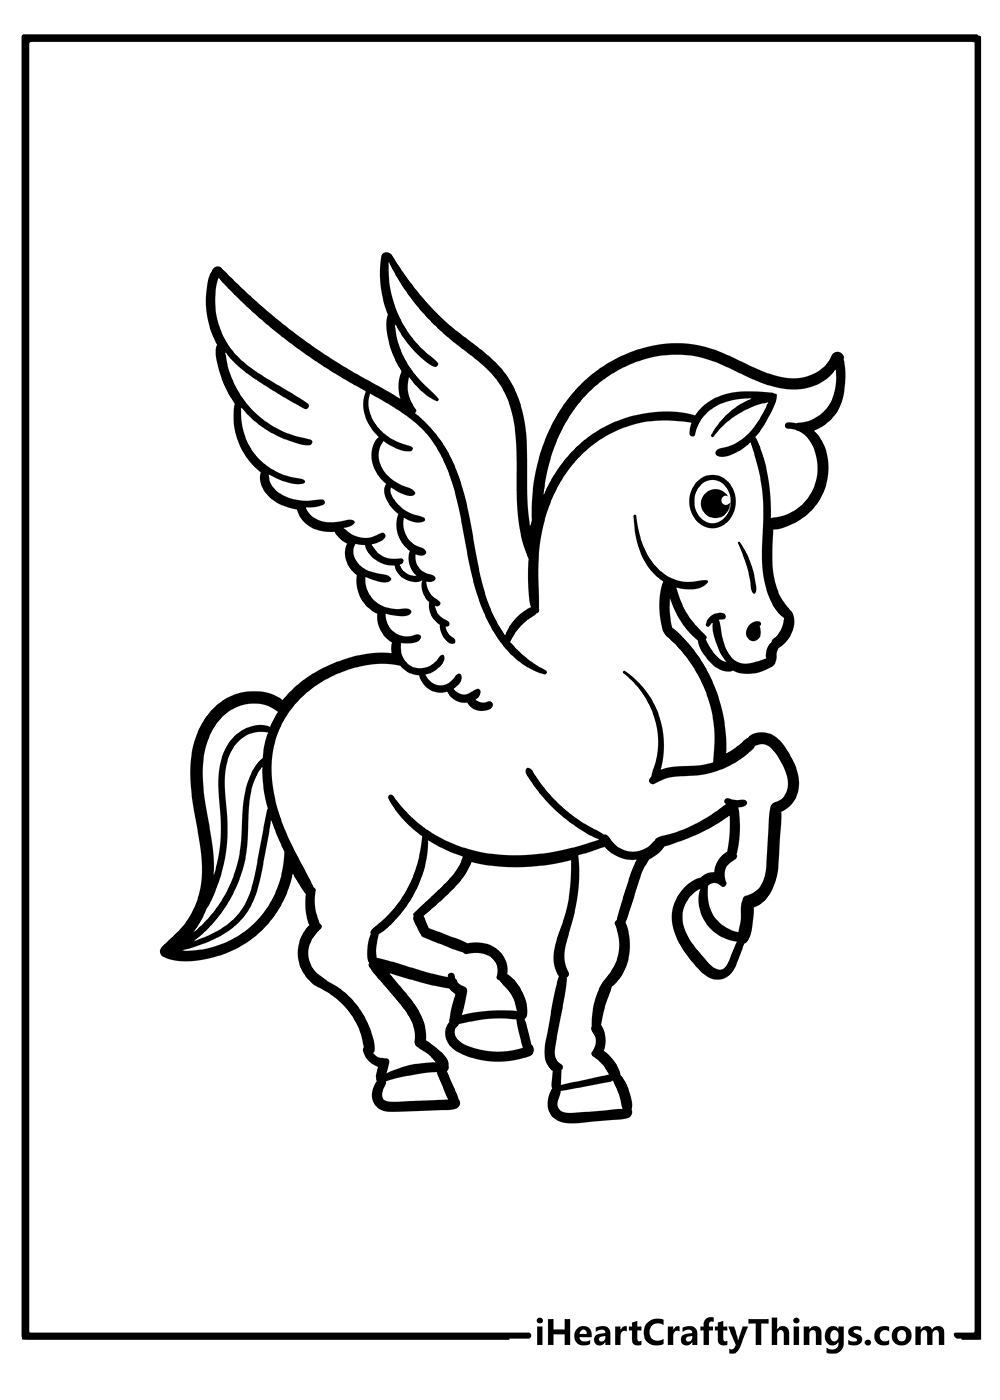 Printable Pegasus Coloring Pages Updated 20